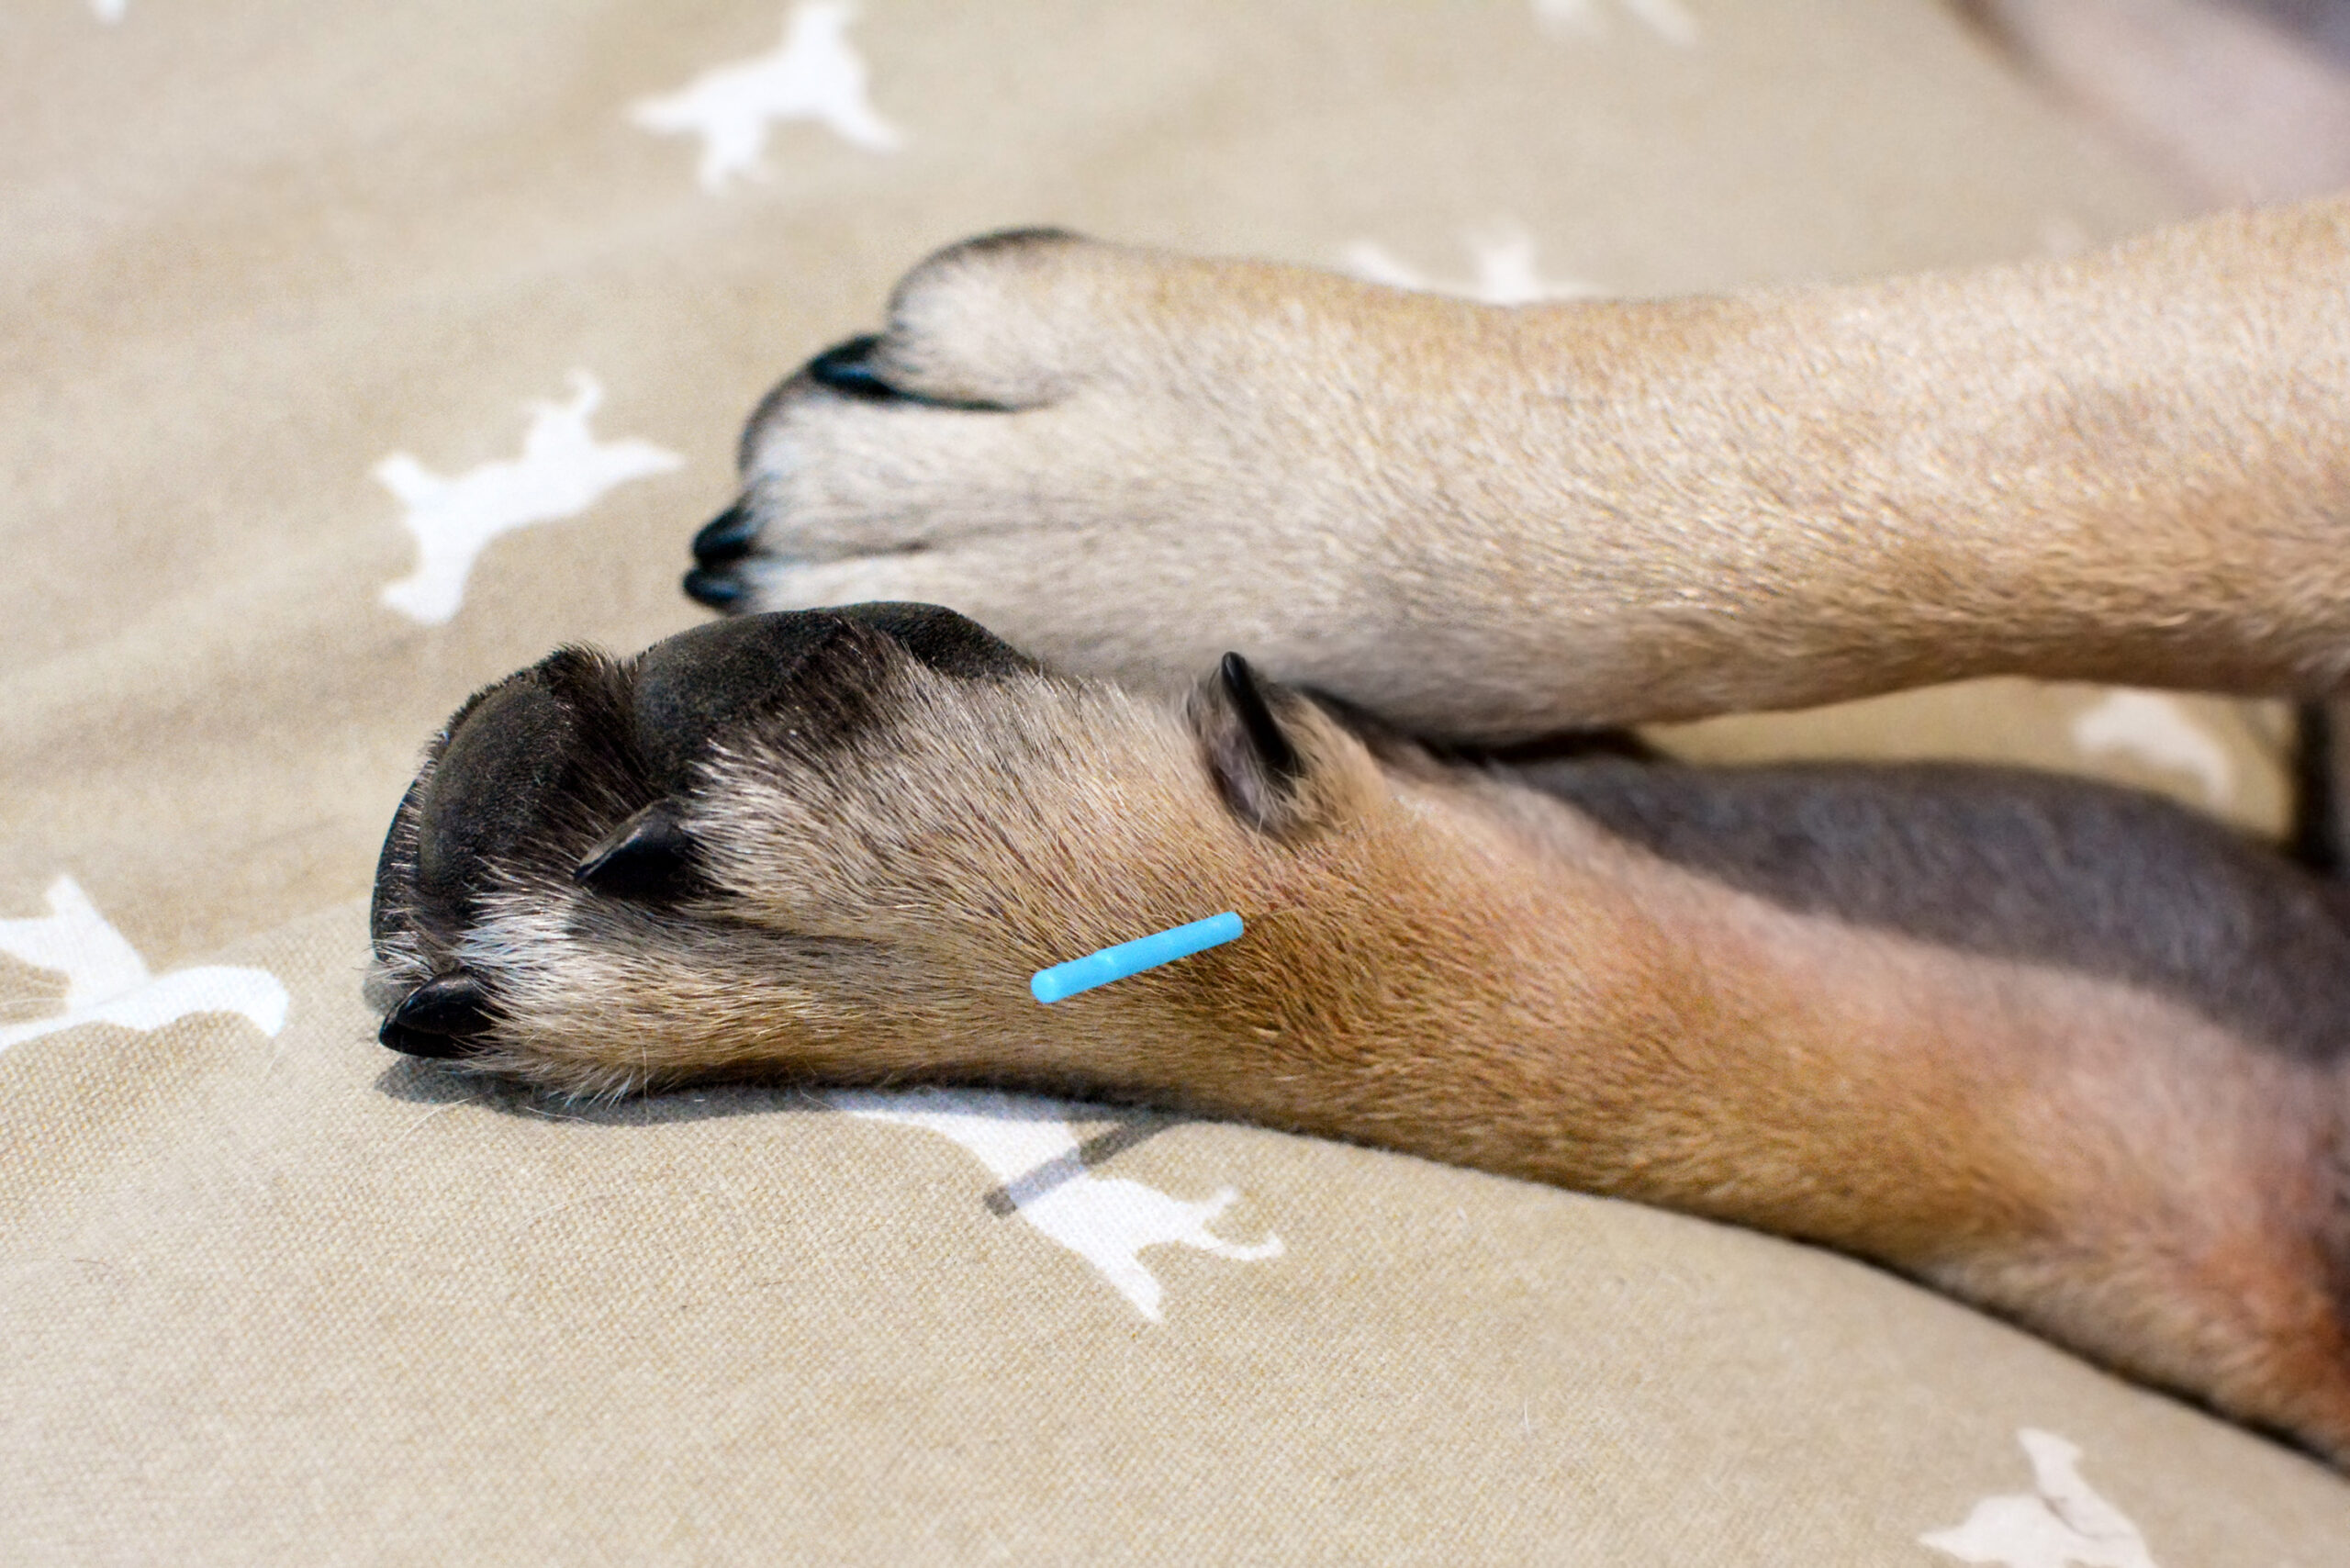 Single long blue acupuncture needles sticking in paw of dog